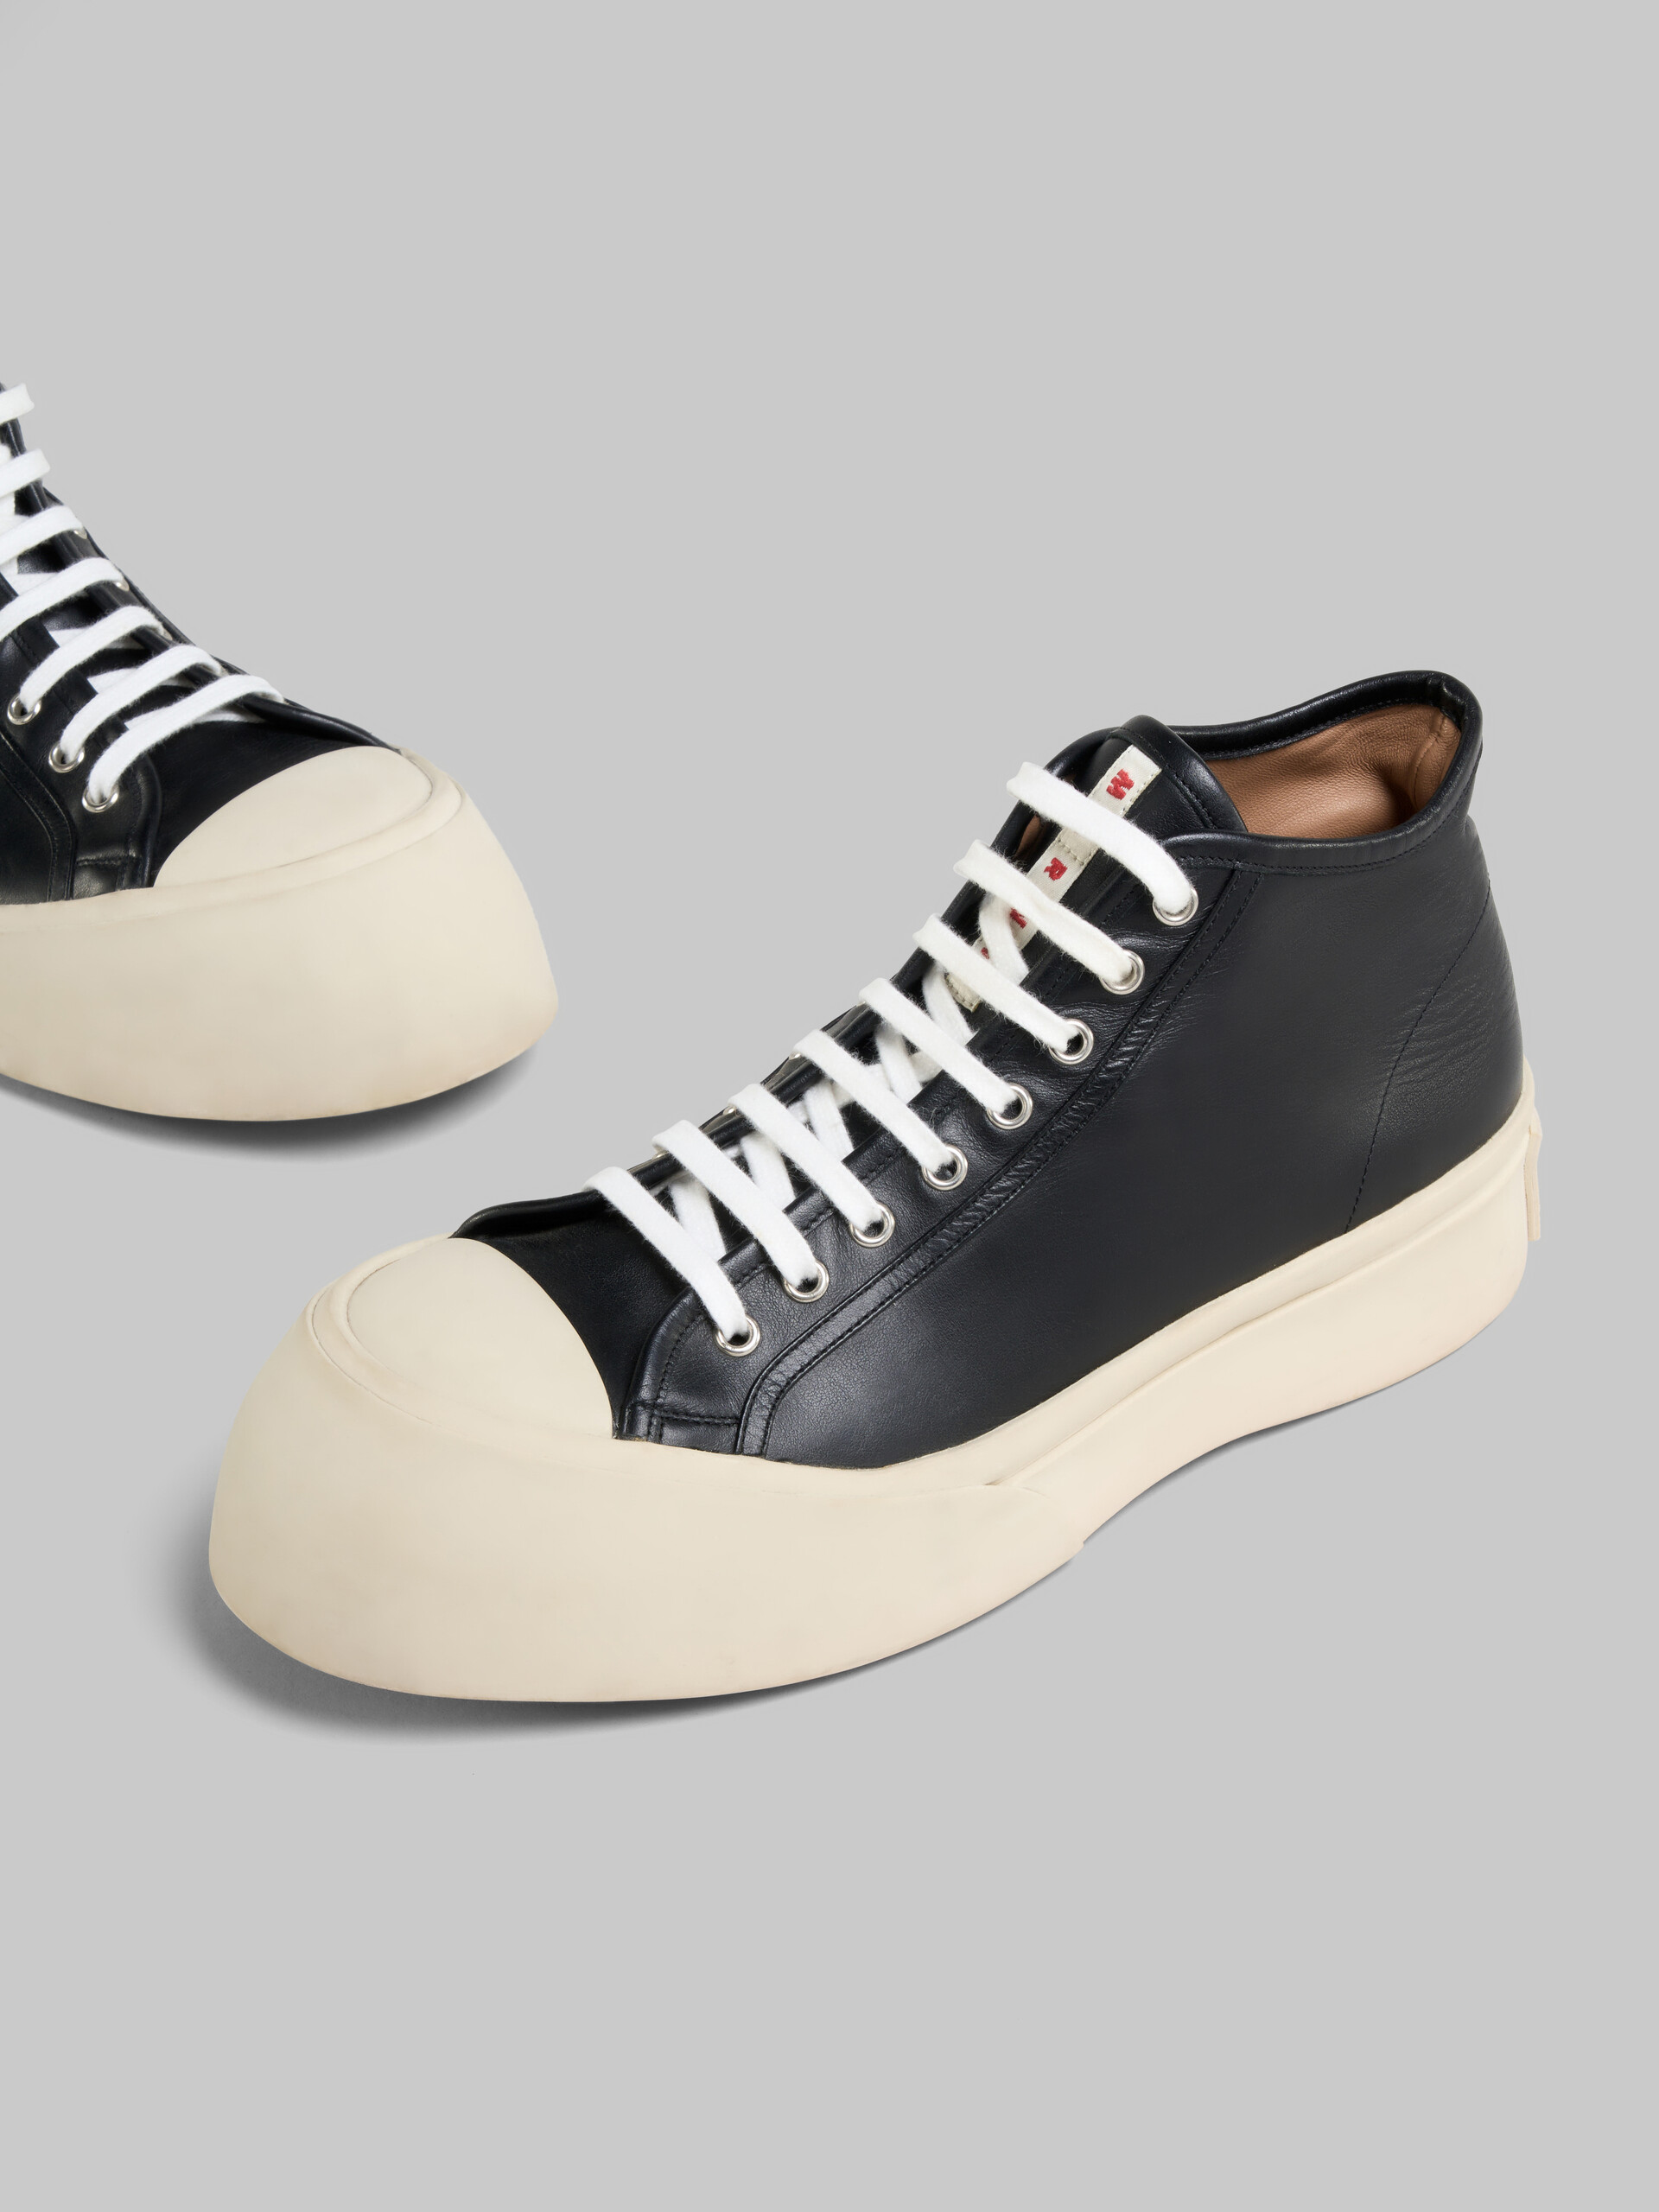 Black nappa leather Pablo high-top sneaker - Sneakers - Image 4